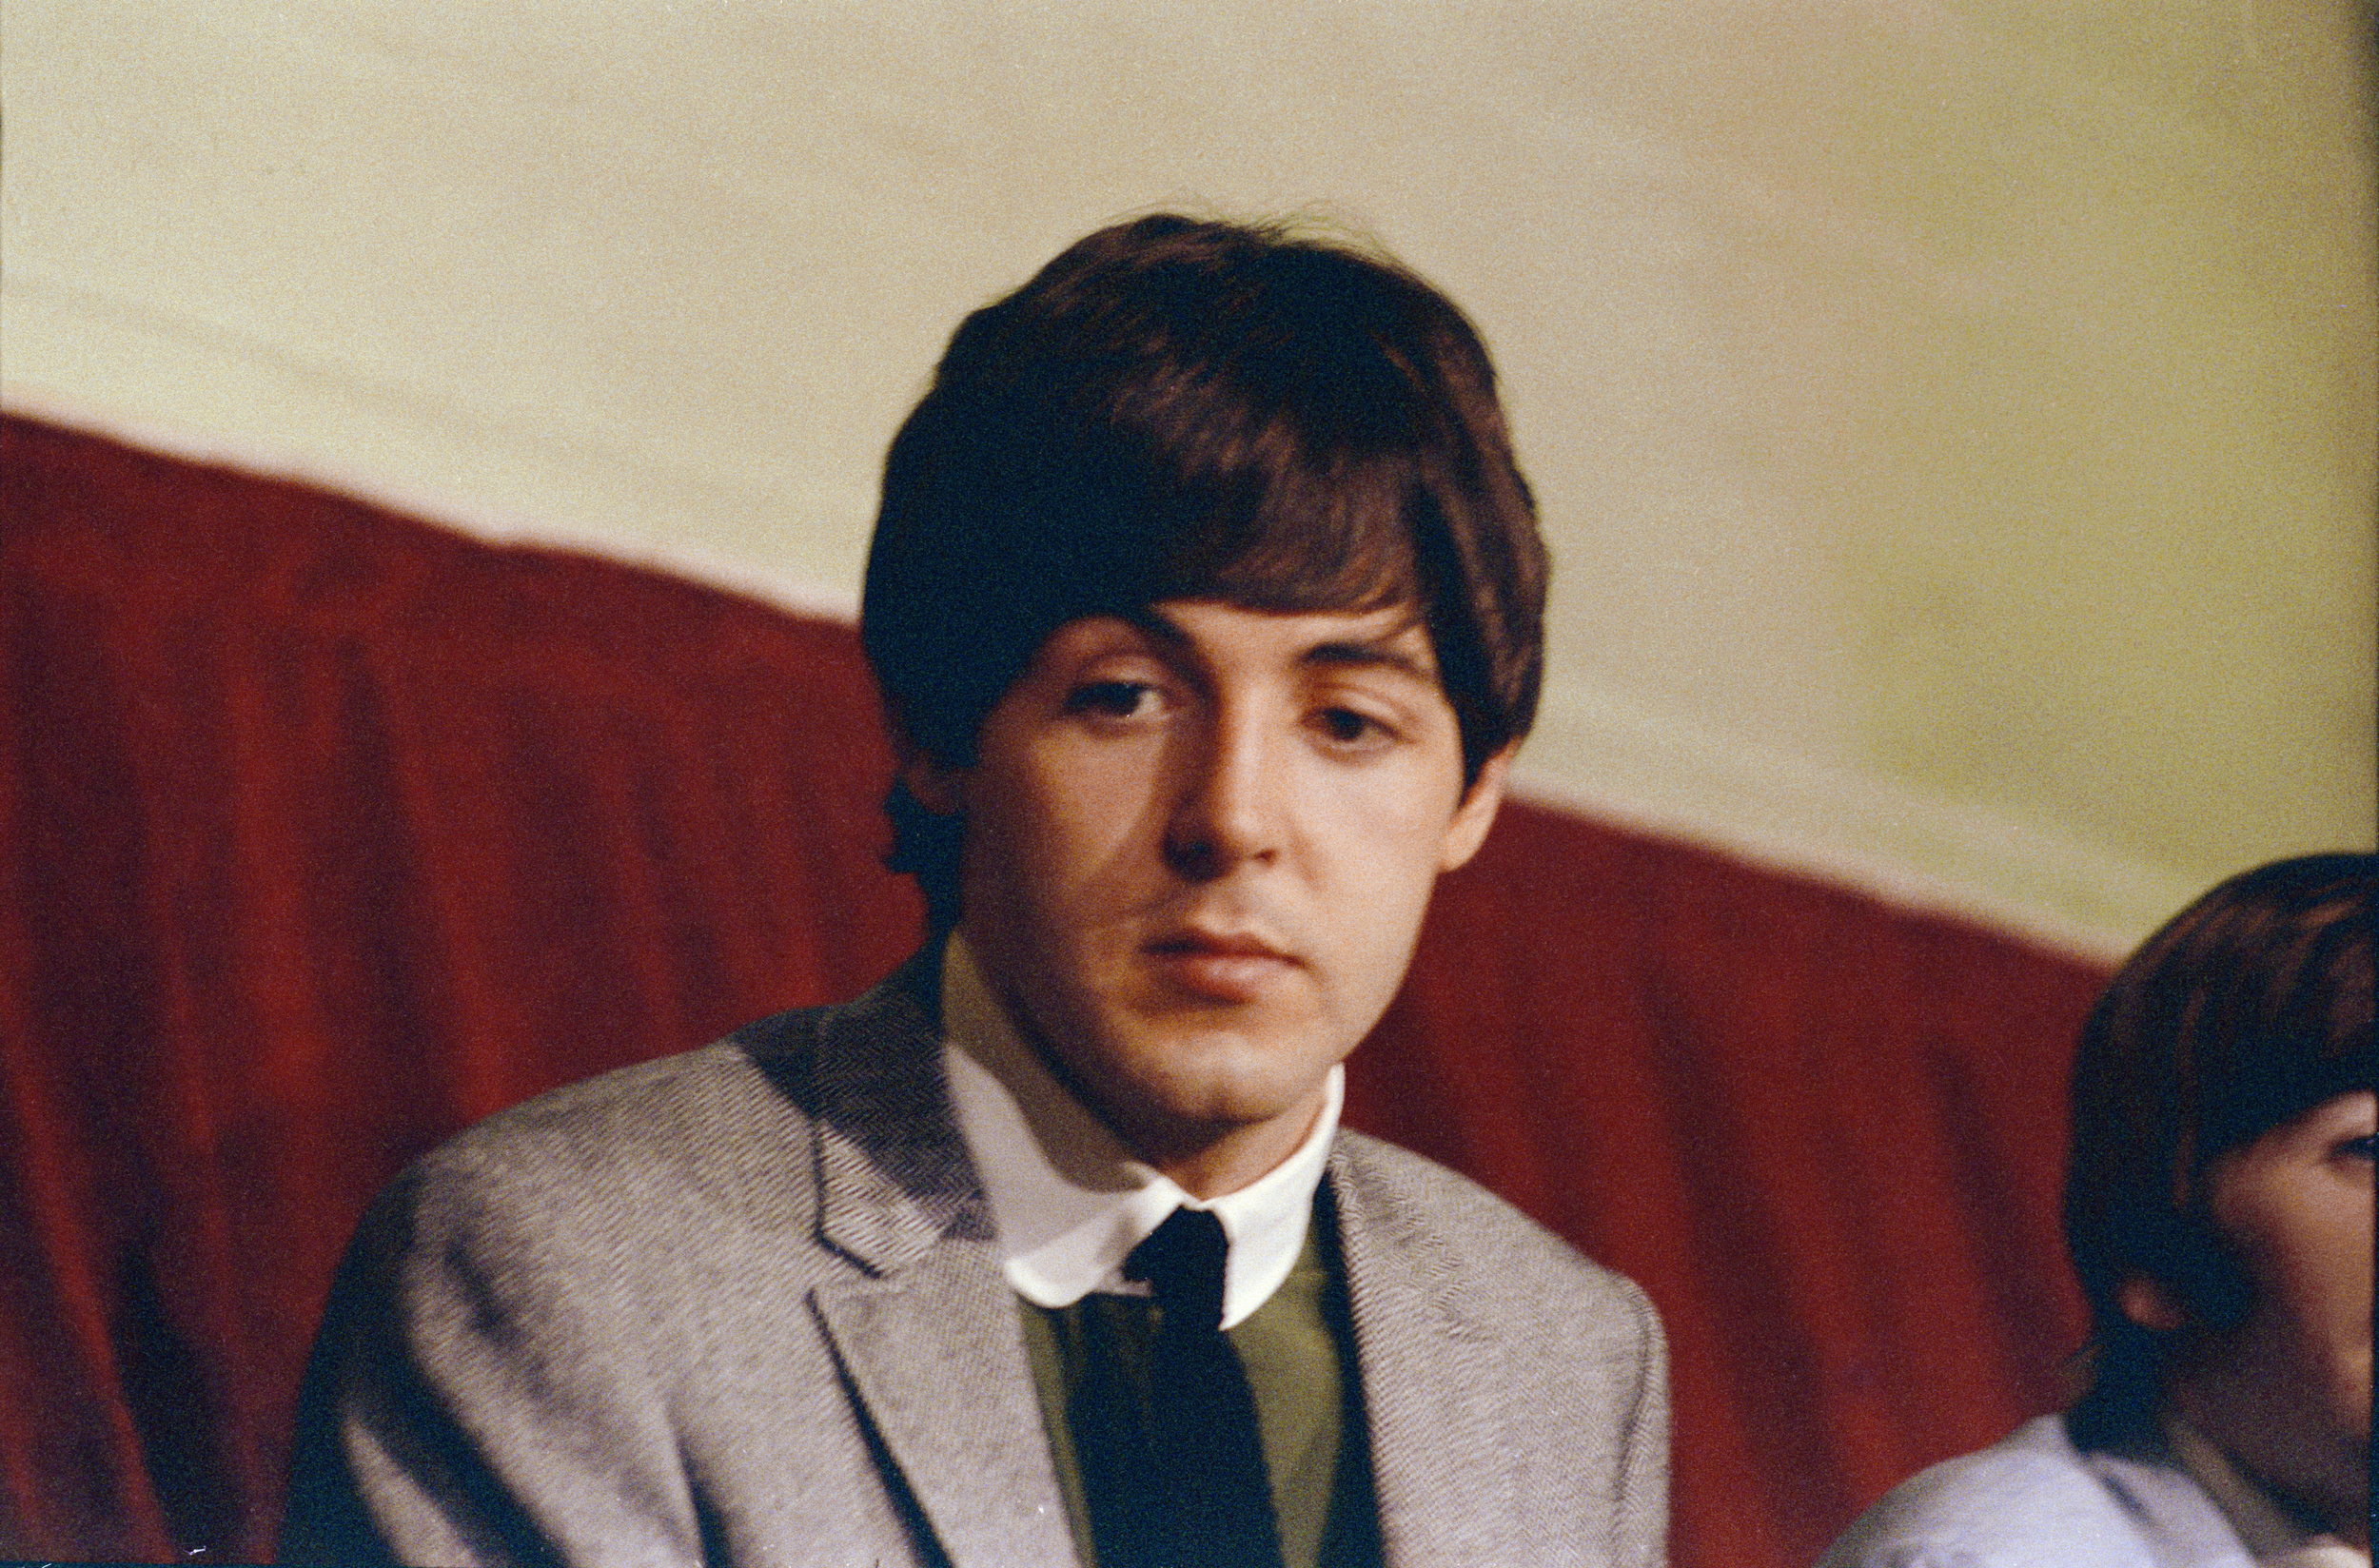 <p>Paul McCartney claims he rolled out of bed, and the entire melody spilled out of his subconscious onto a piano. What he didn’t have initially were the lyrics (the working title was “Scrambled Eggs”), but once those got sorted out he came away with a song for the ages, one that expanded the Beatles audience to adult radio and, via George Martin, brought a symphonic quality to their music. It is the most important song in their catalog and close to their very best.</p><p><a href='https://www.msn.com/en-us/community/channel/vid-cj9pqbr0vn9in2b6ddcd8sfgpfq6x6utp44fssrv6mc2gtybw0us'>Follow us on MSN to see more of our exclusive entertainment content.</a></p>